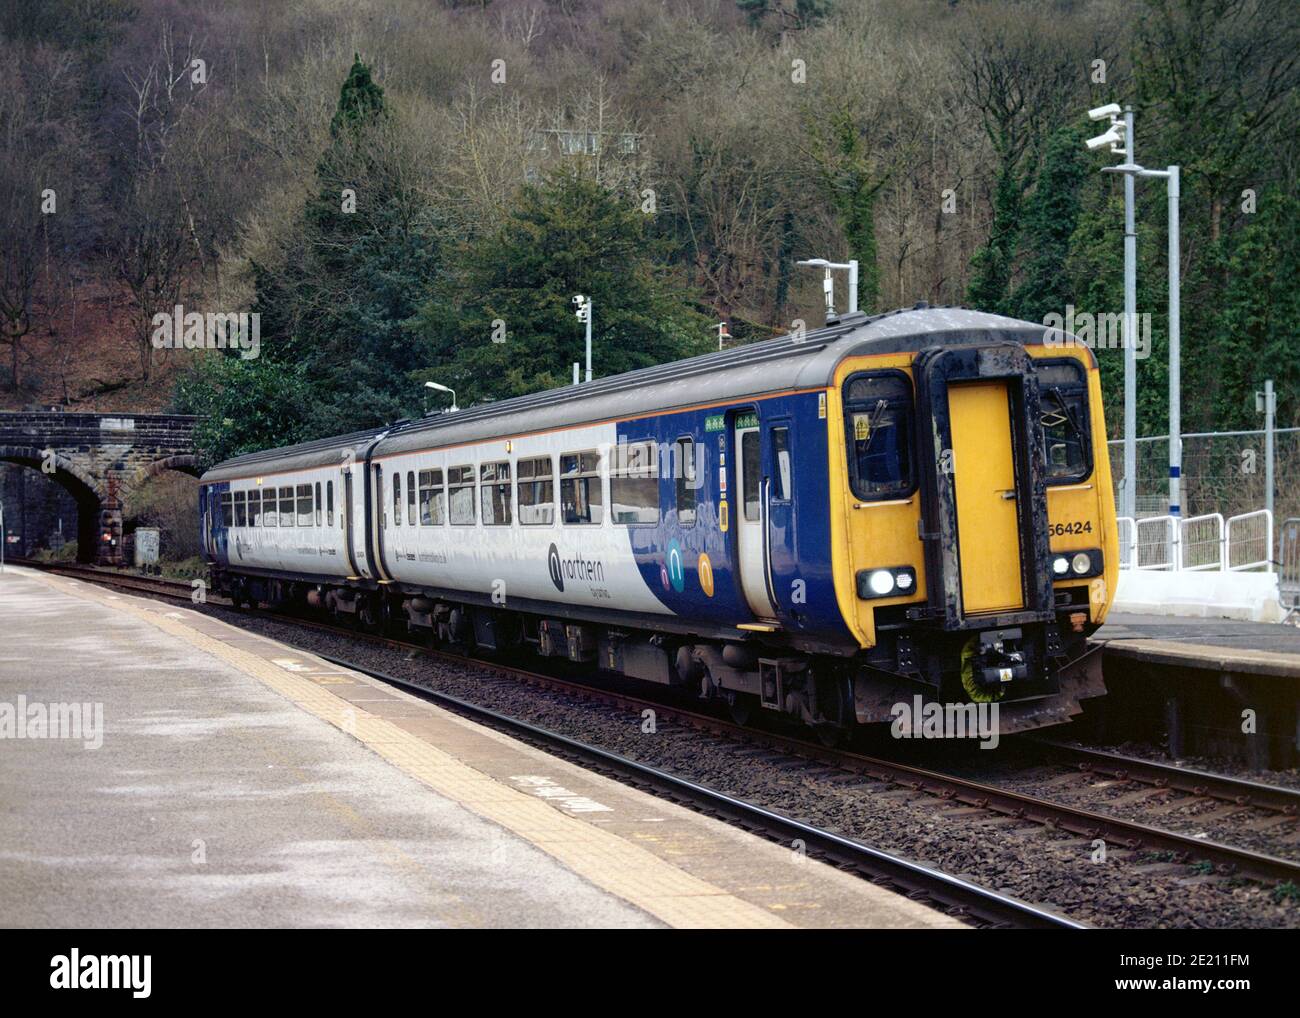 Grindleford, UK - February 2020: A local train operating by Northern stopped at Grindleford station. Stock Photo